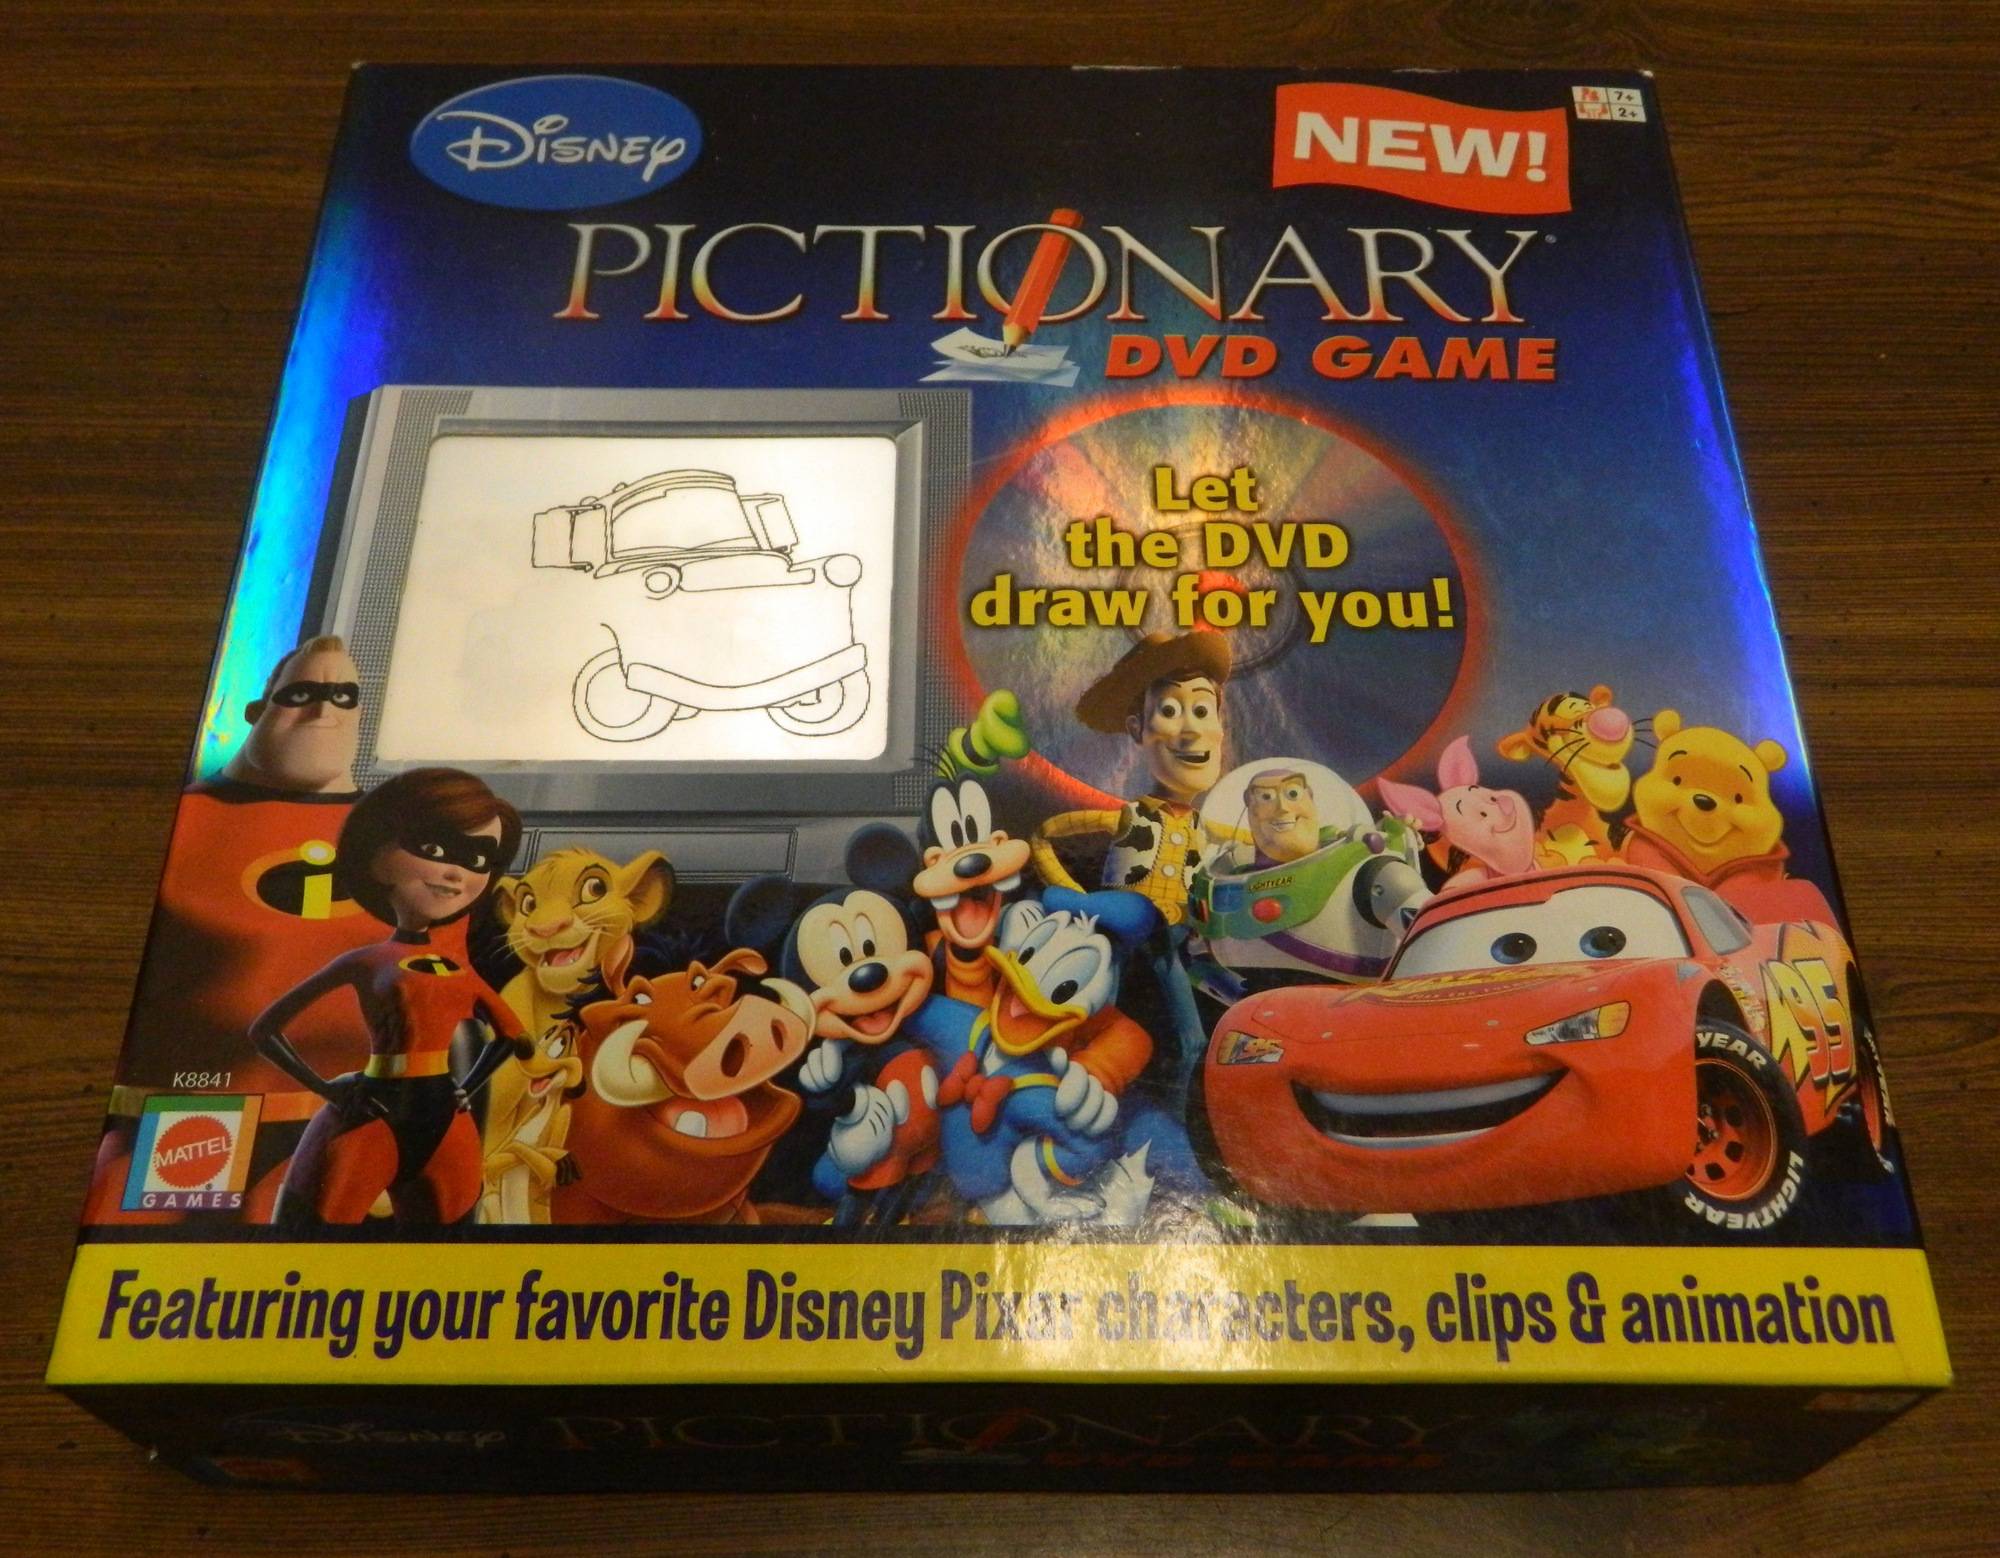 Disney Pictionary DVD Game Board Game Review and Rules